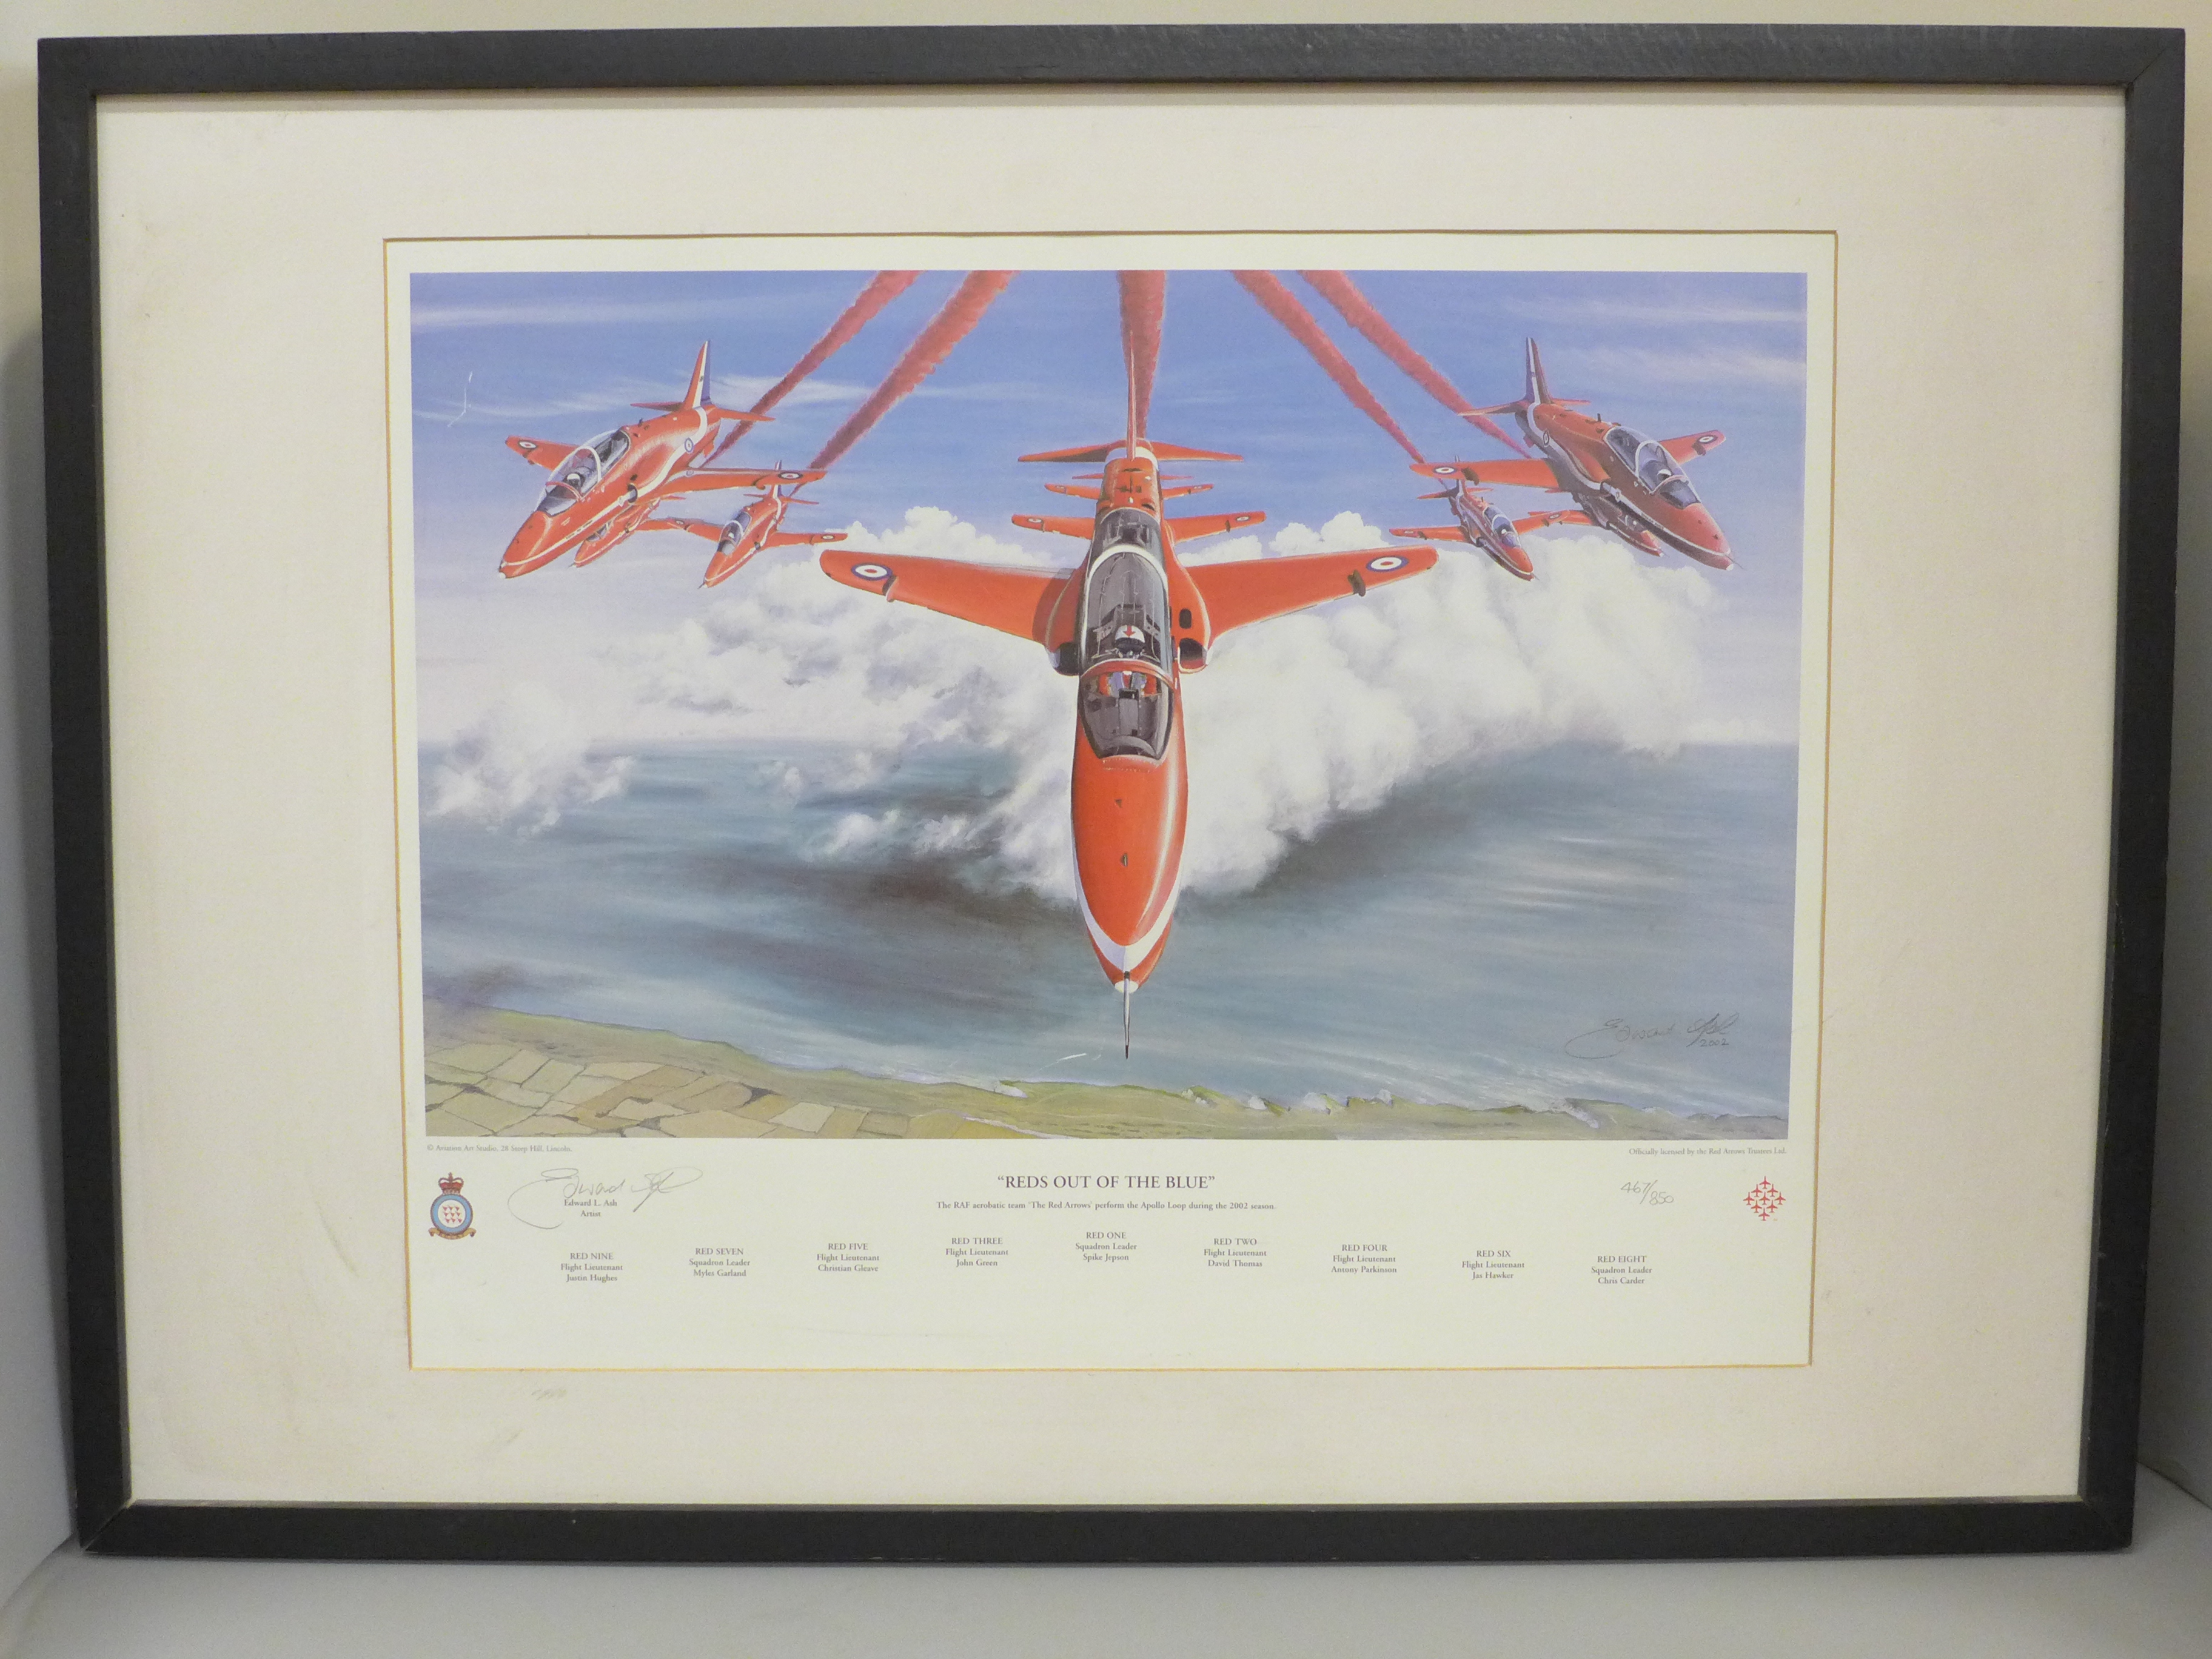 A Red Arrows commemorative signed framed print, Reds Out Of The Blue, 467/850